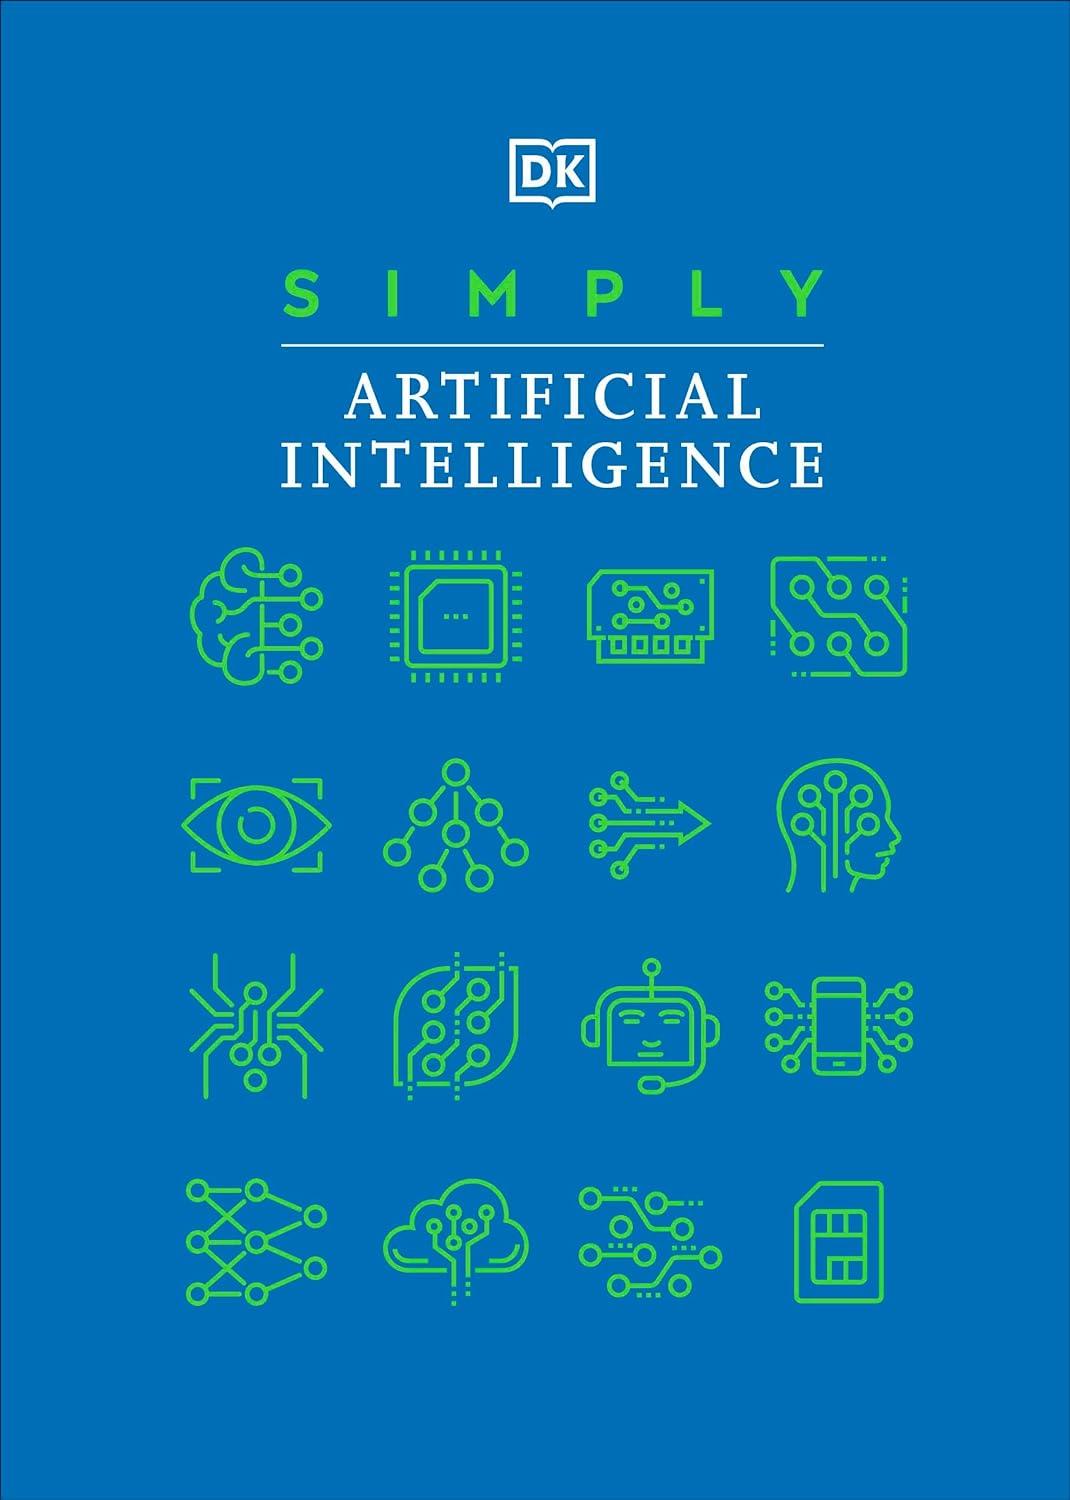 simply artificial intelligence 1st edition dk 074407682x, 978-0744076820